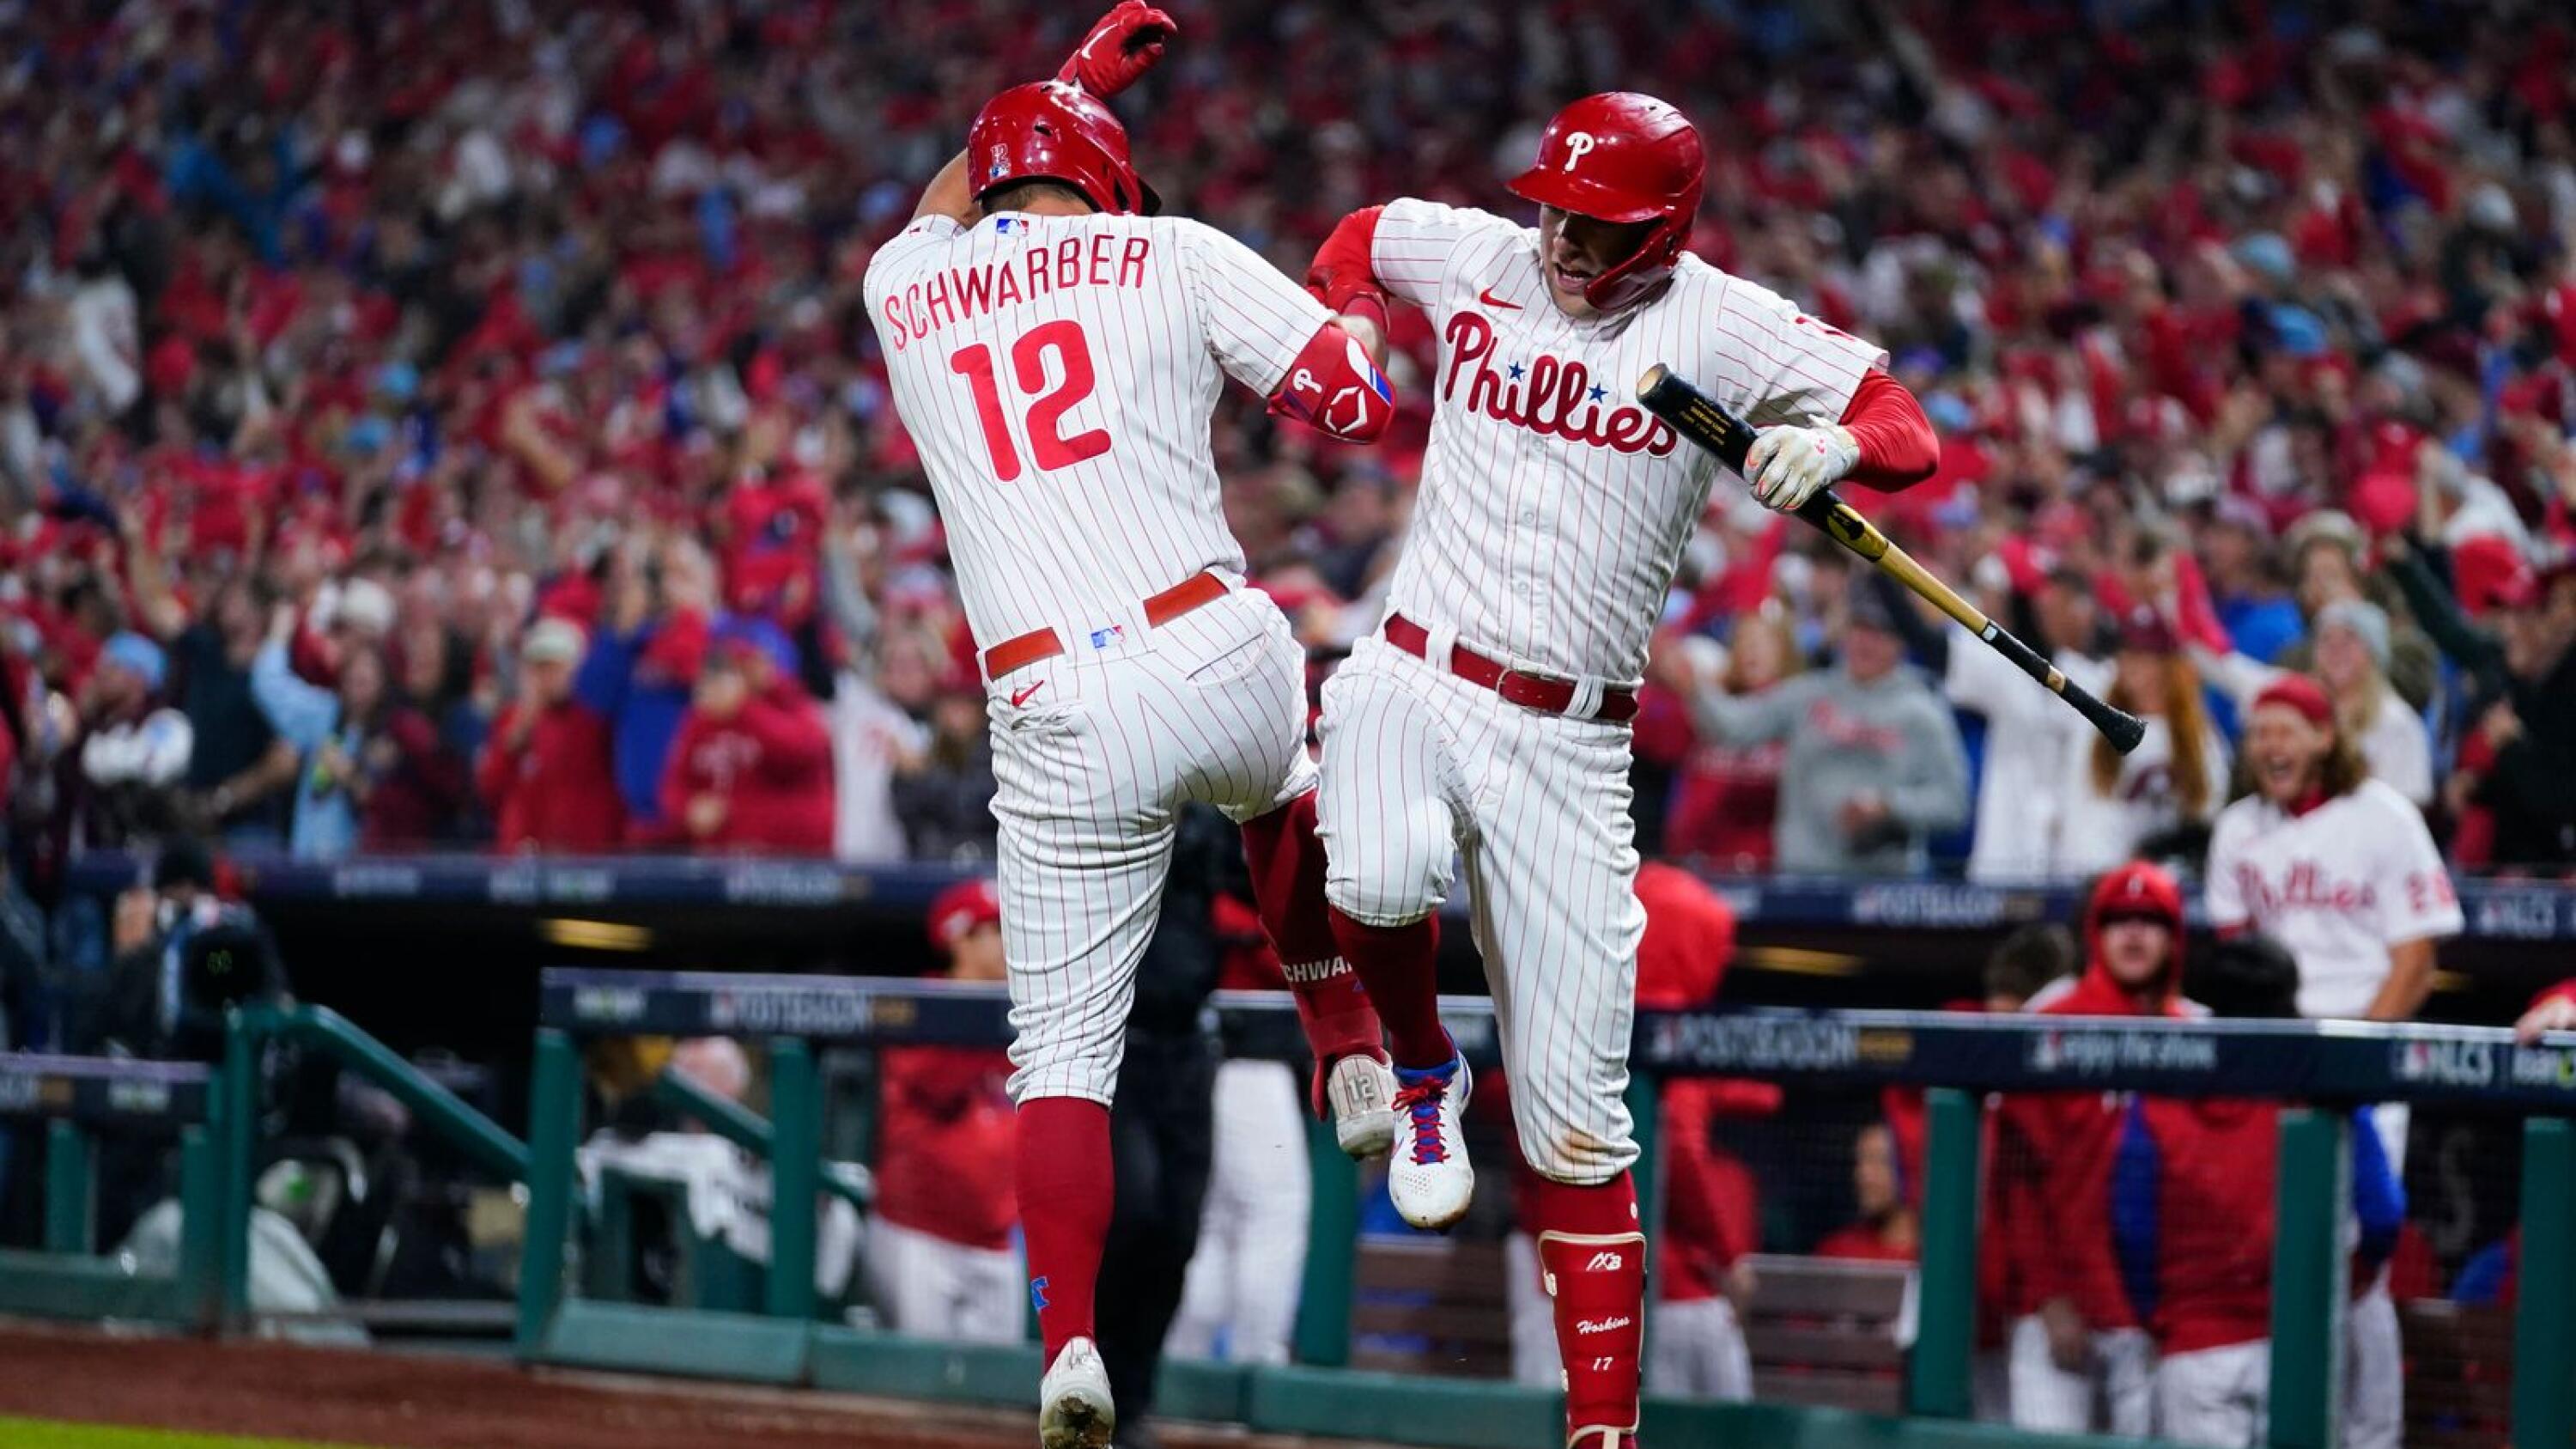 Phillies shake off early deficit, outslug Padres 10-6 to take 3-1 NLCS